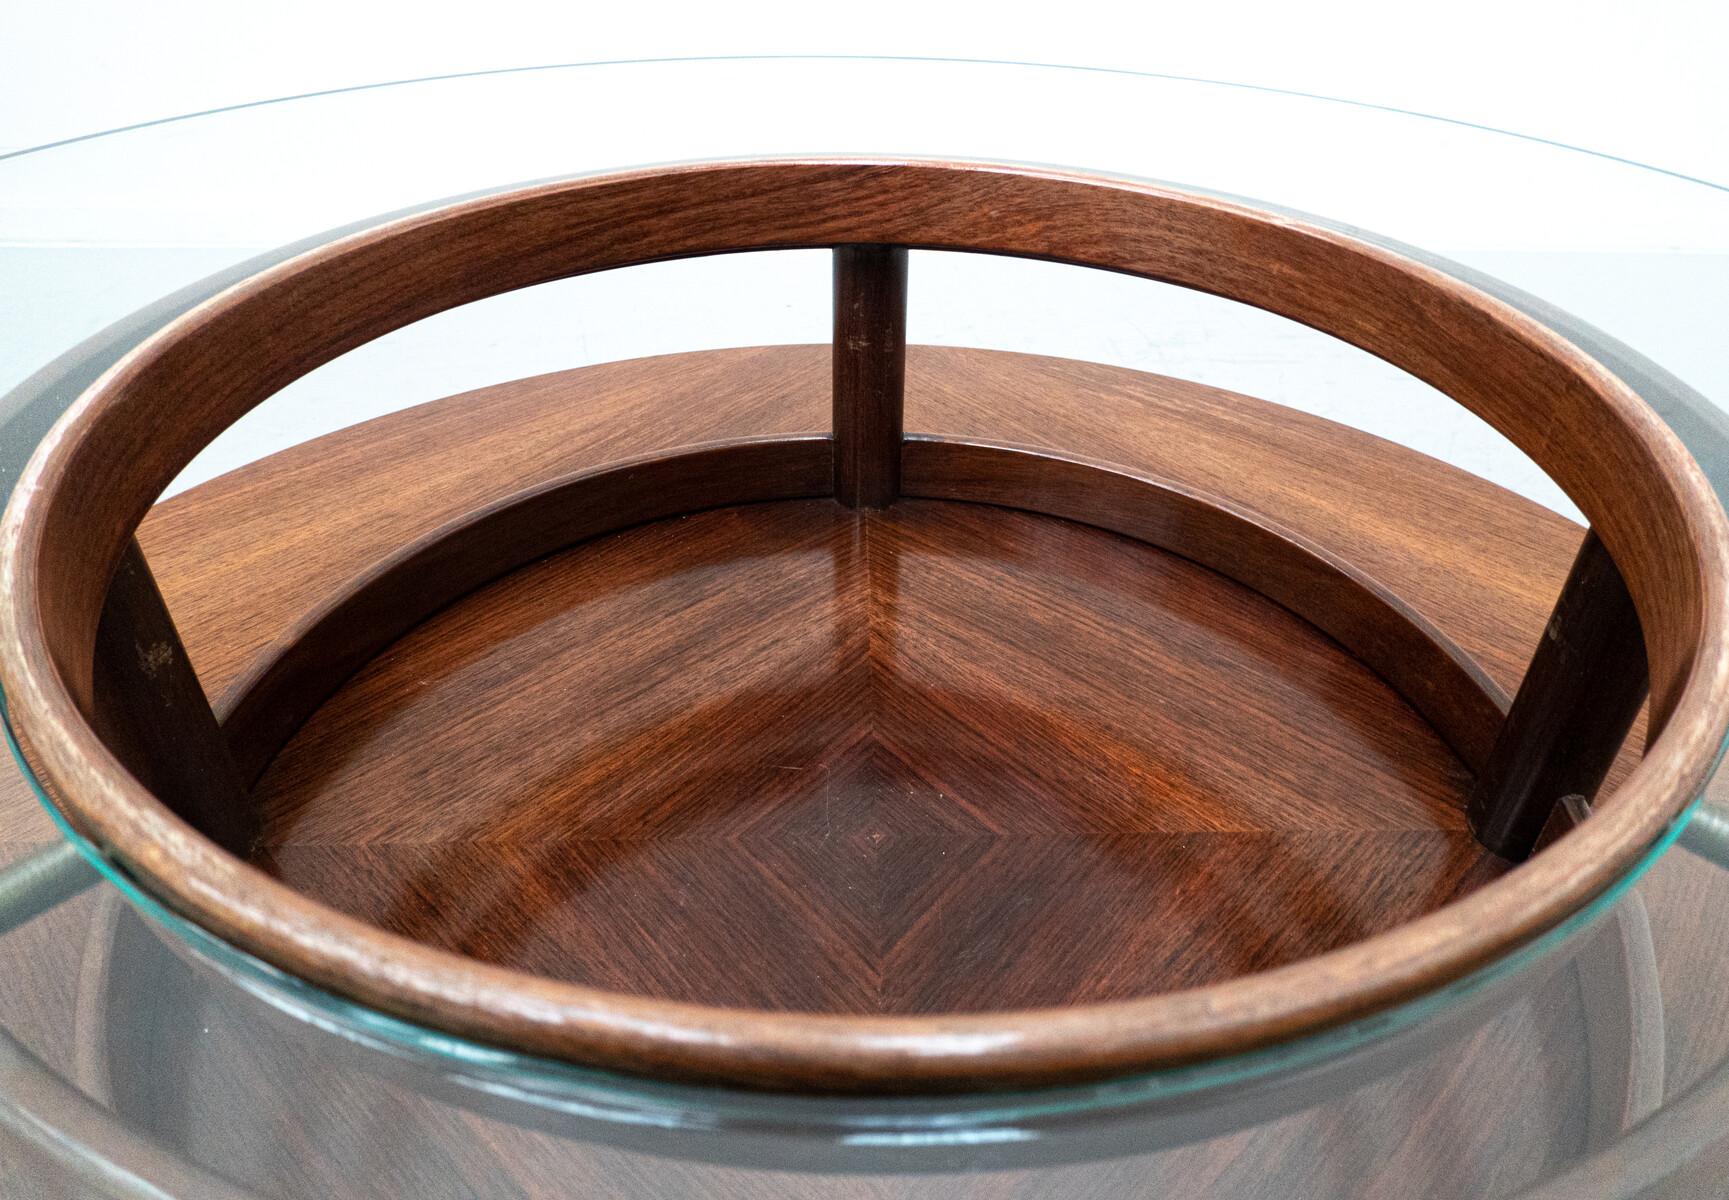 Mid-Century Gianfranco Frattini Round Coffee Table, Teak and Glass, 1950s For Sale 2